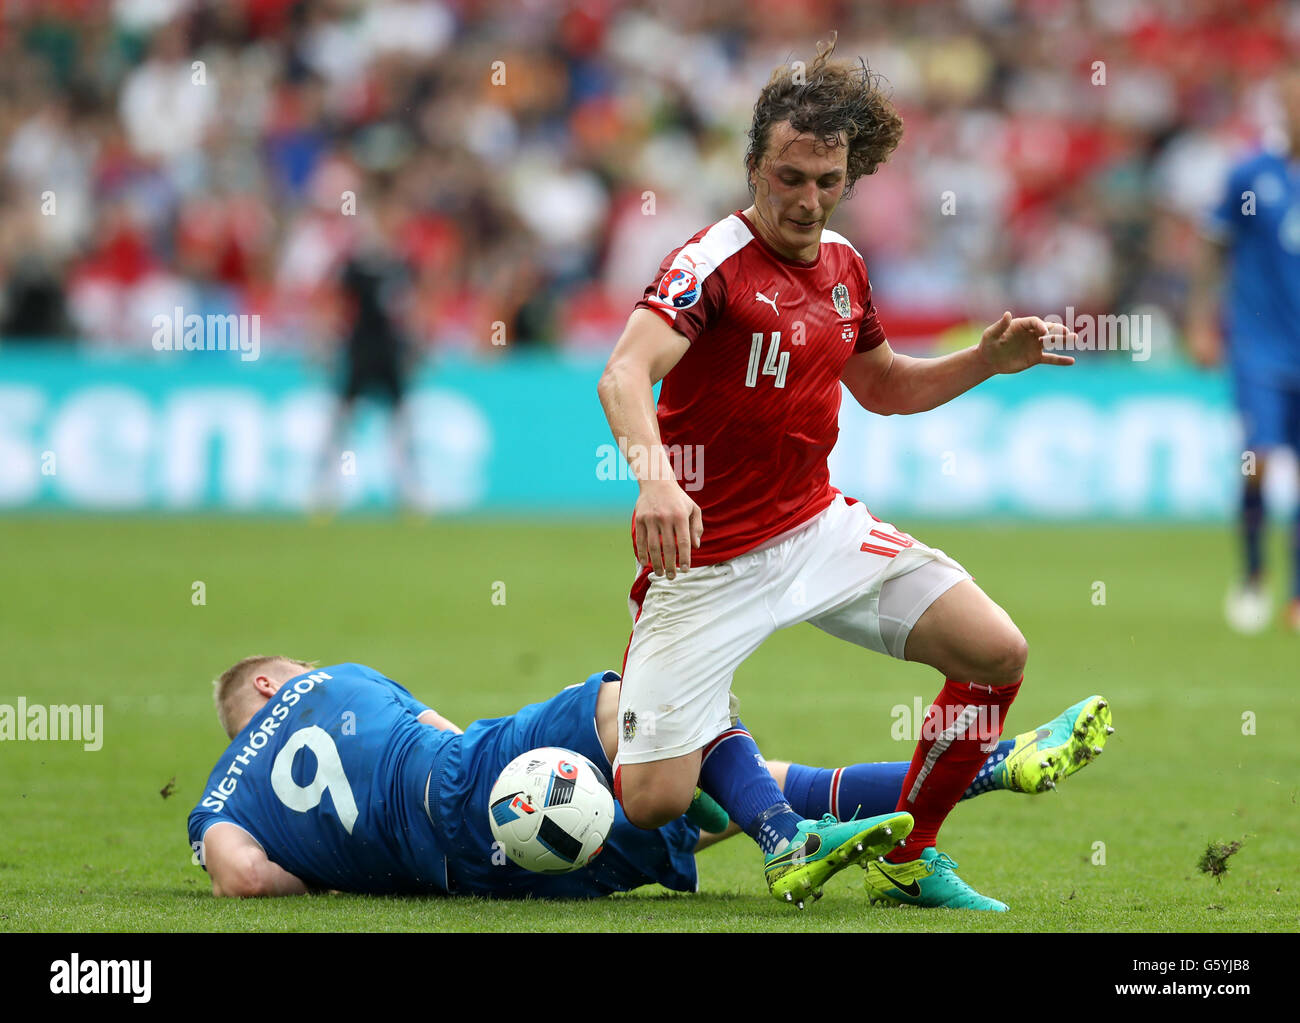 Iceland's Kolbeinn Sigthorsson (left) and Austria's Julian Baumgartlinger battle for the ball during the Euro 2016, Group F match at the Stade de France, Paris. Stock Photo